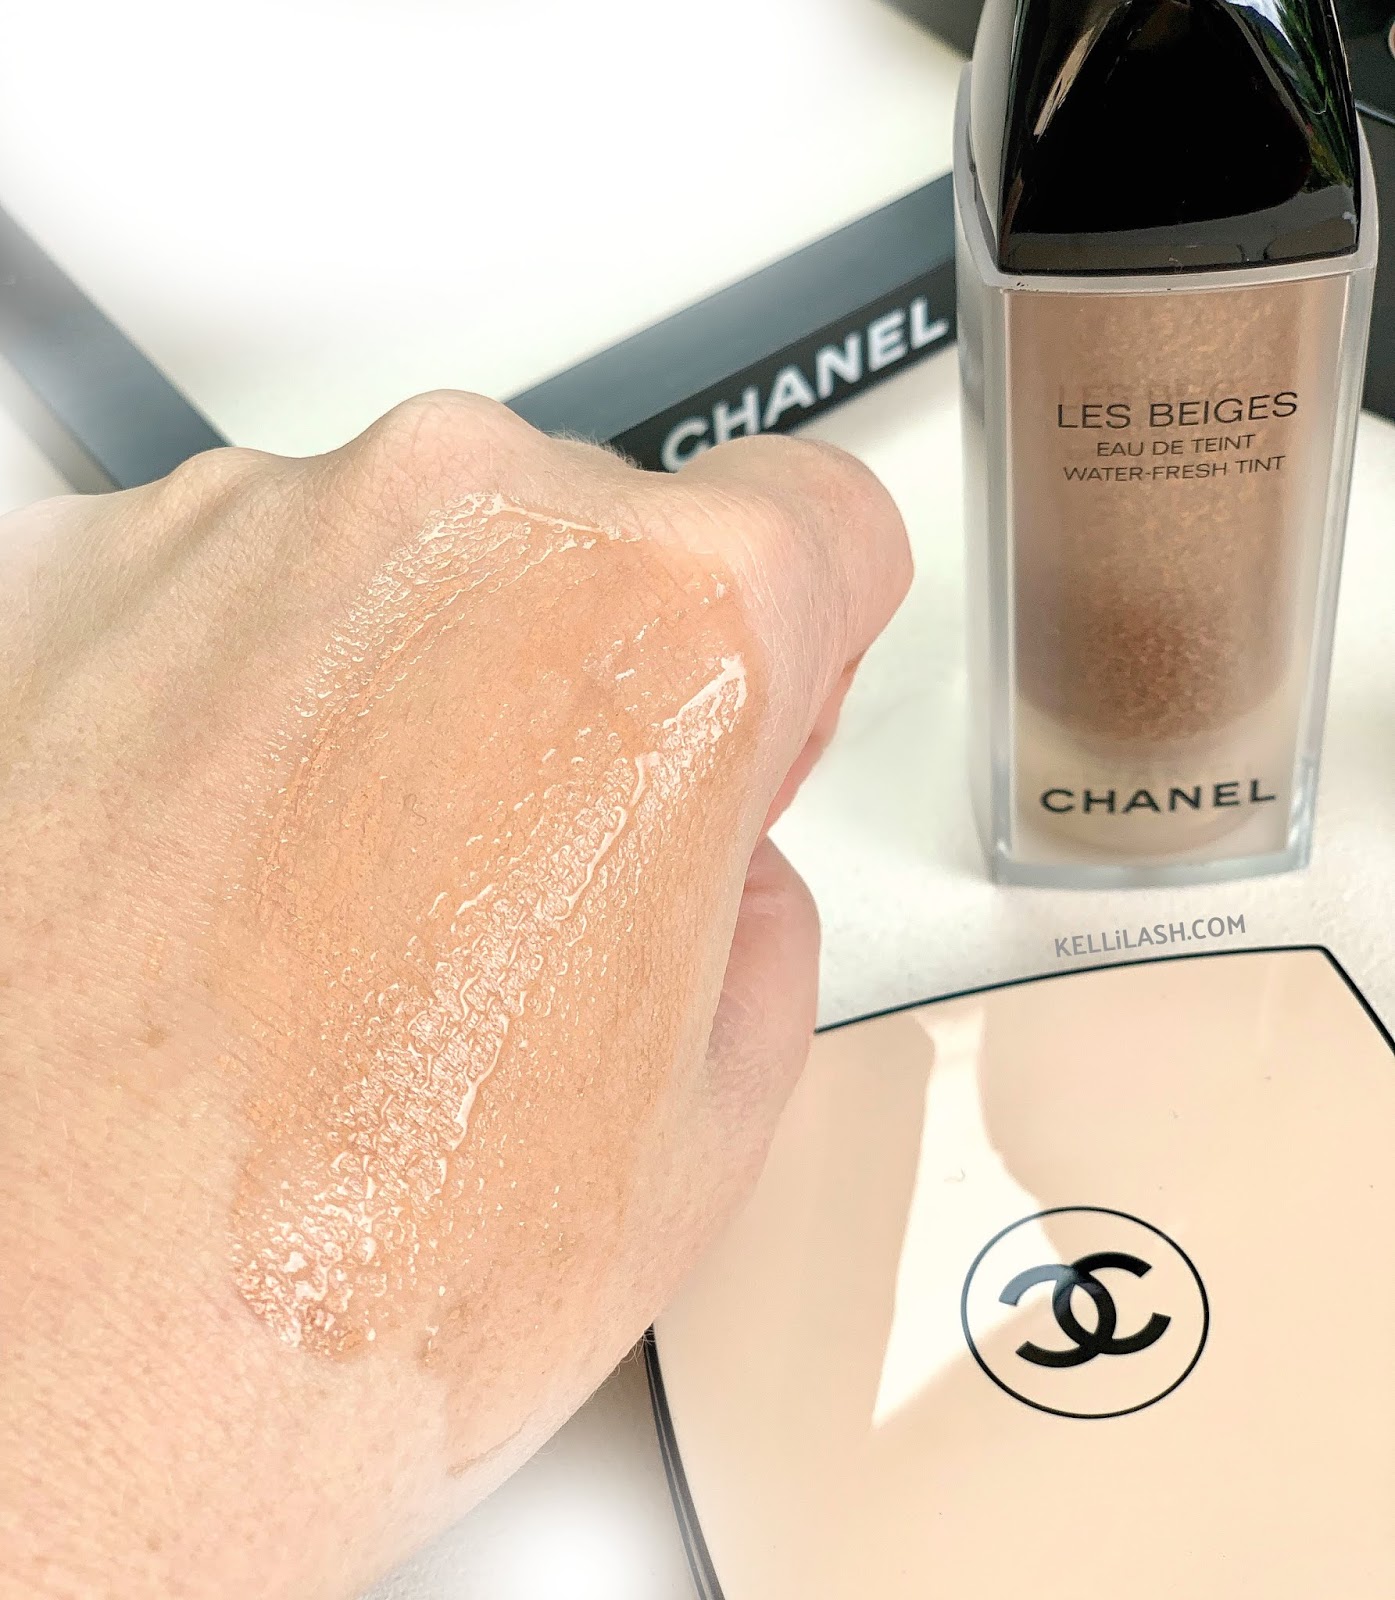 CHANEL, LES BEIGES WATER-FRESH TINT